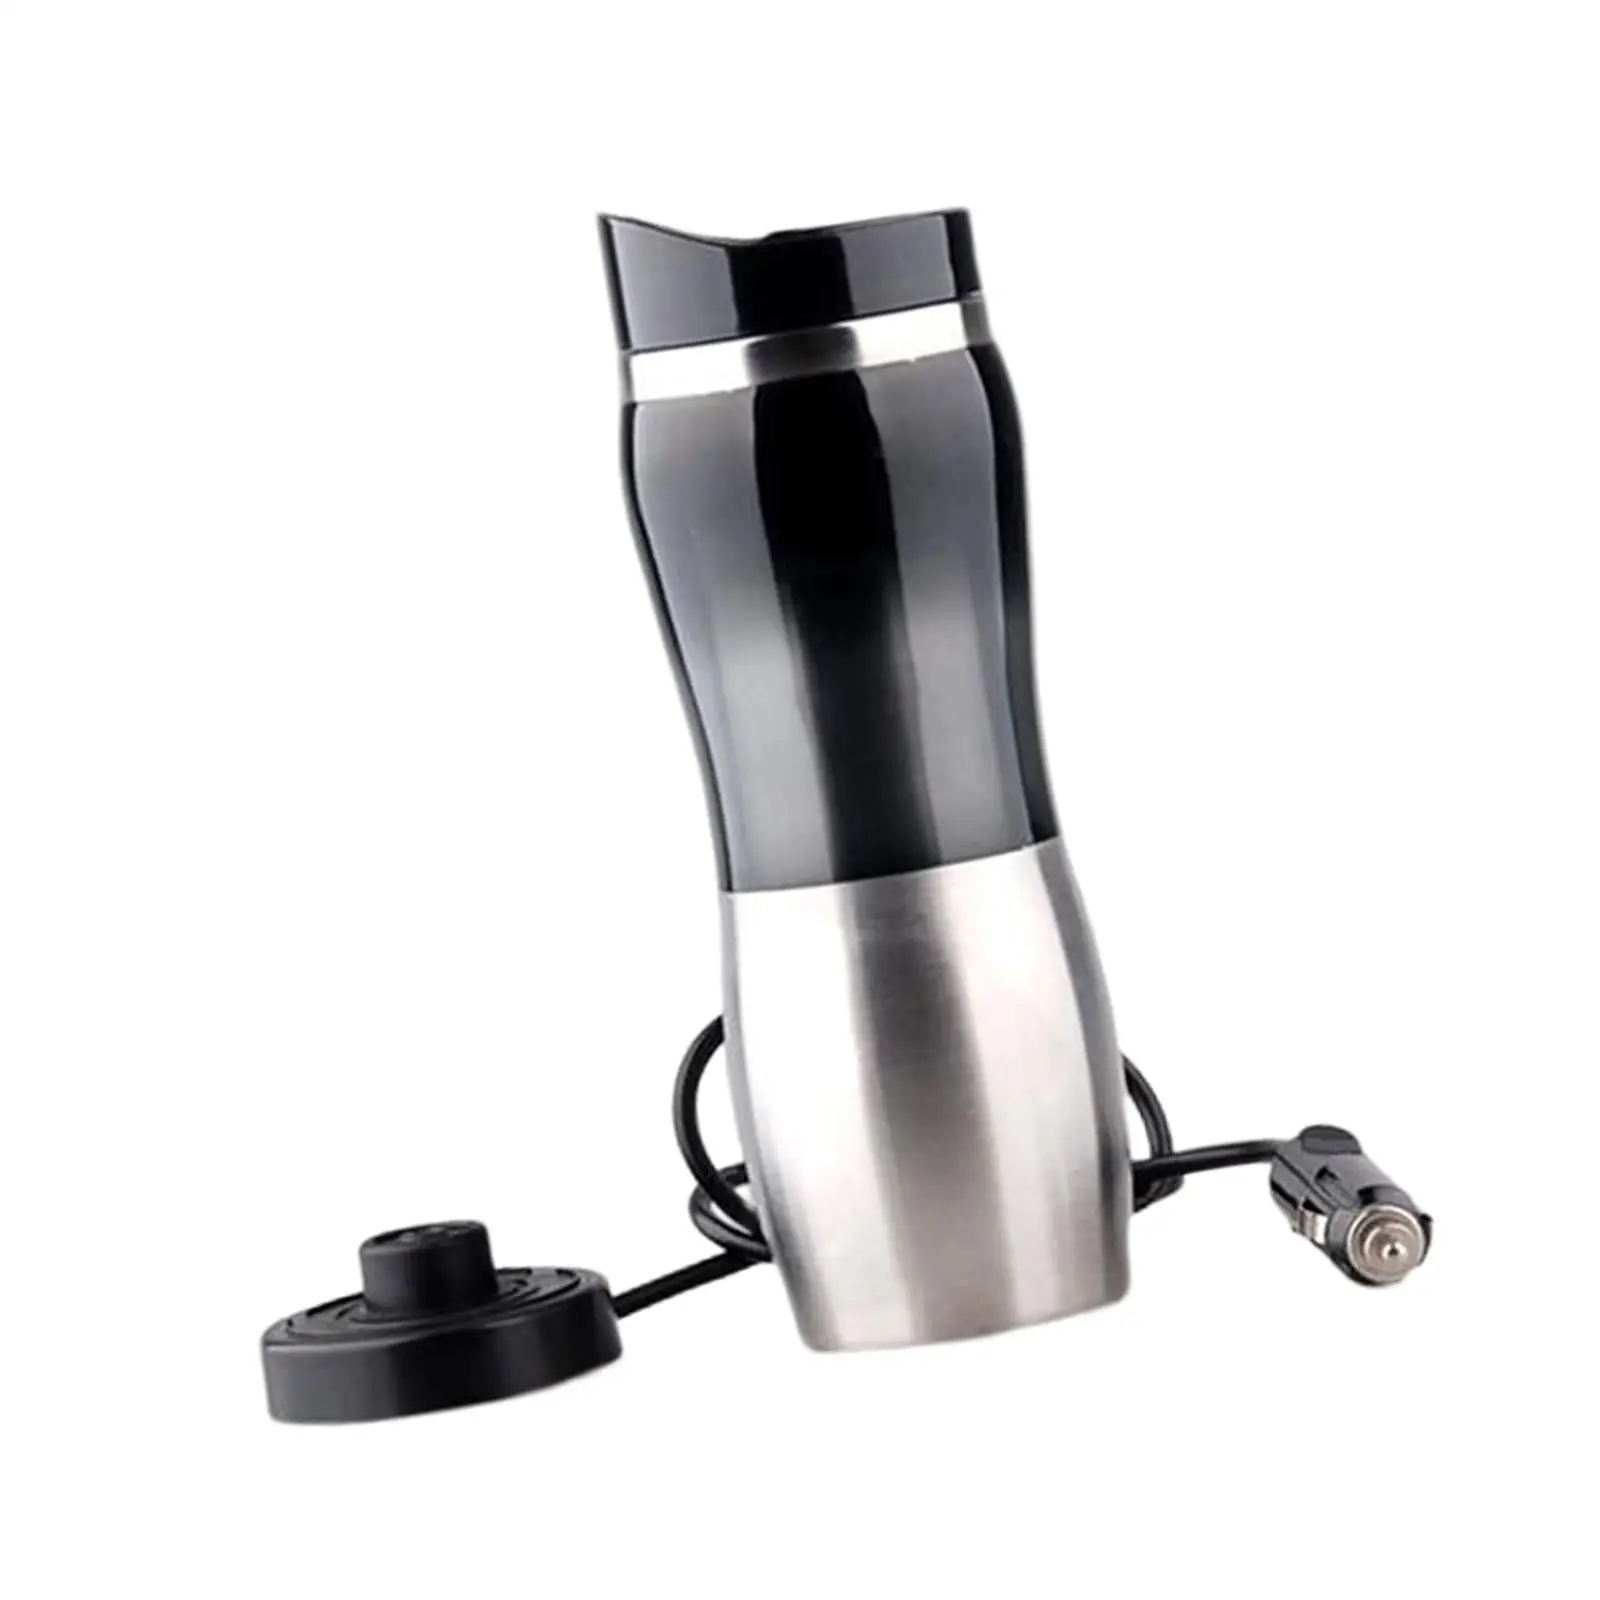 Car Electric Kettle 400ml 12V Portable in Car Electric Car Water Heater Mug for Tea Camping Boat Hot Water Eggs Travel